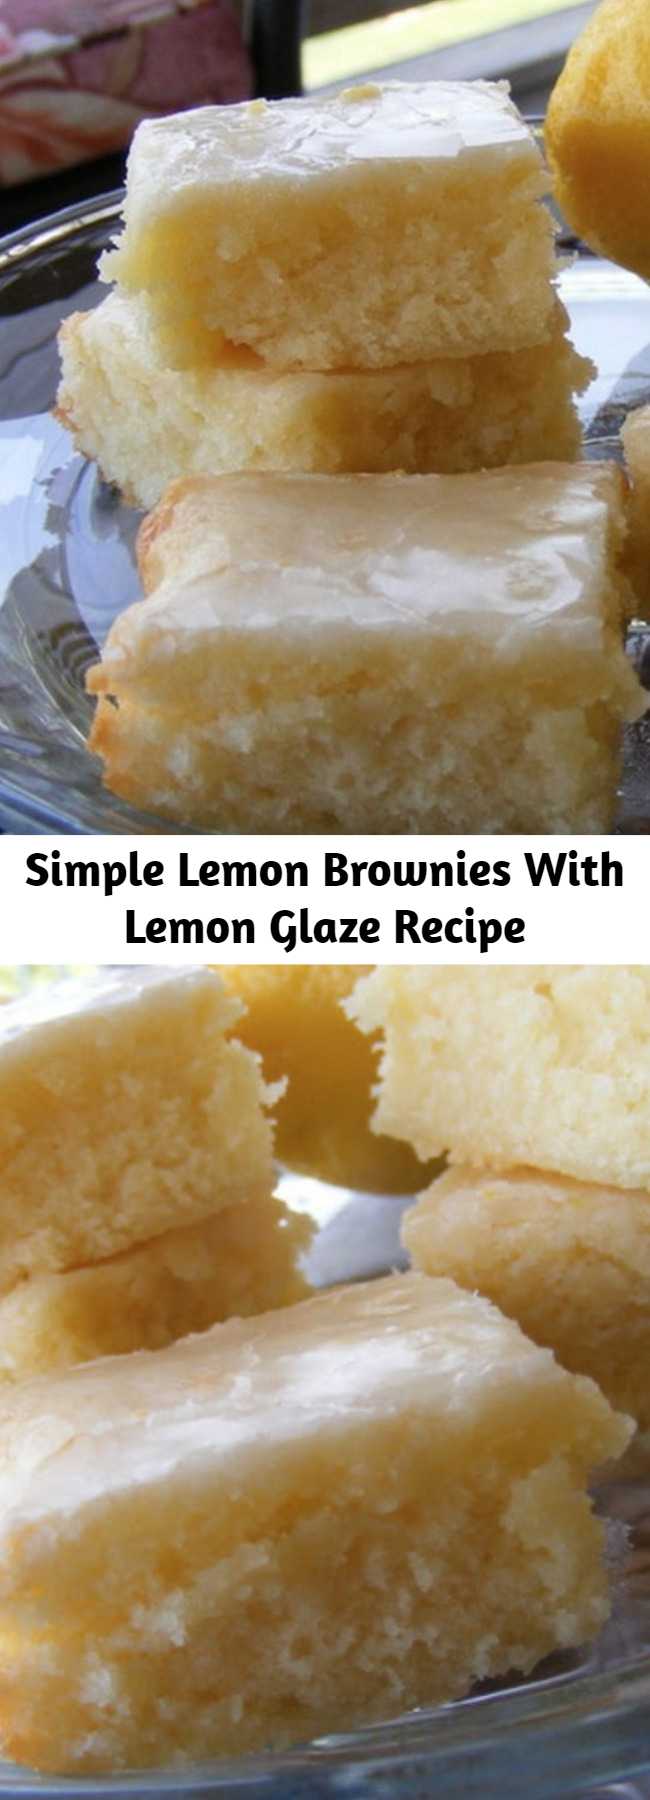 Simple Lemon Brownies With Lemon Glaze Recipe - Delicious and EASY to make Lemon Brownies with a sweet Lemon Glaze frosting that's so good you won't eat just one! Make these in minutes for your family!